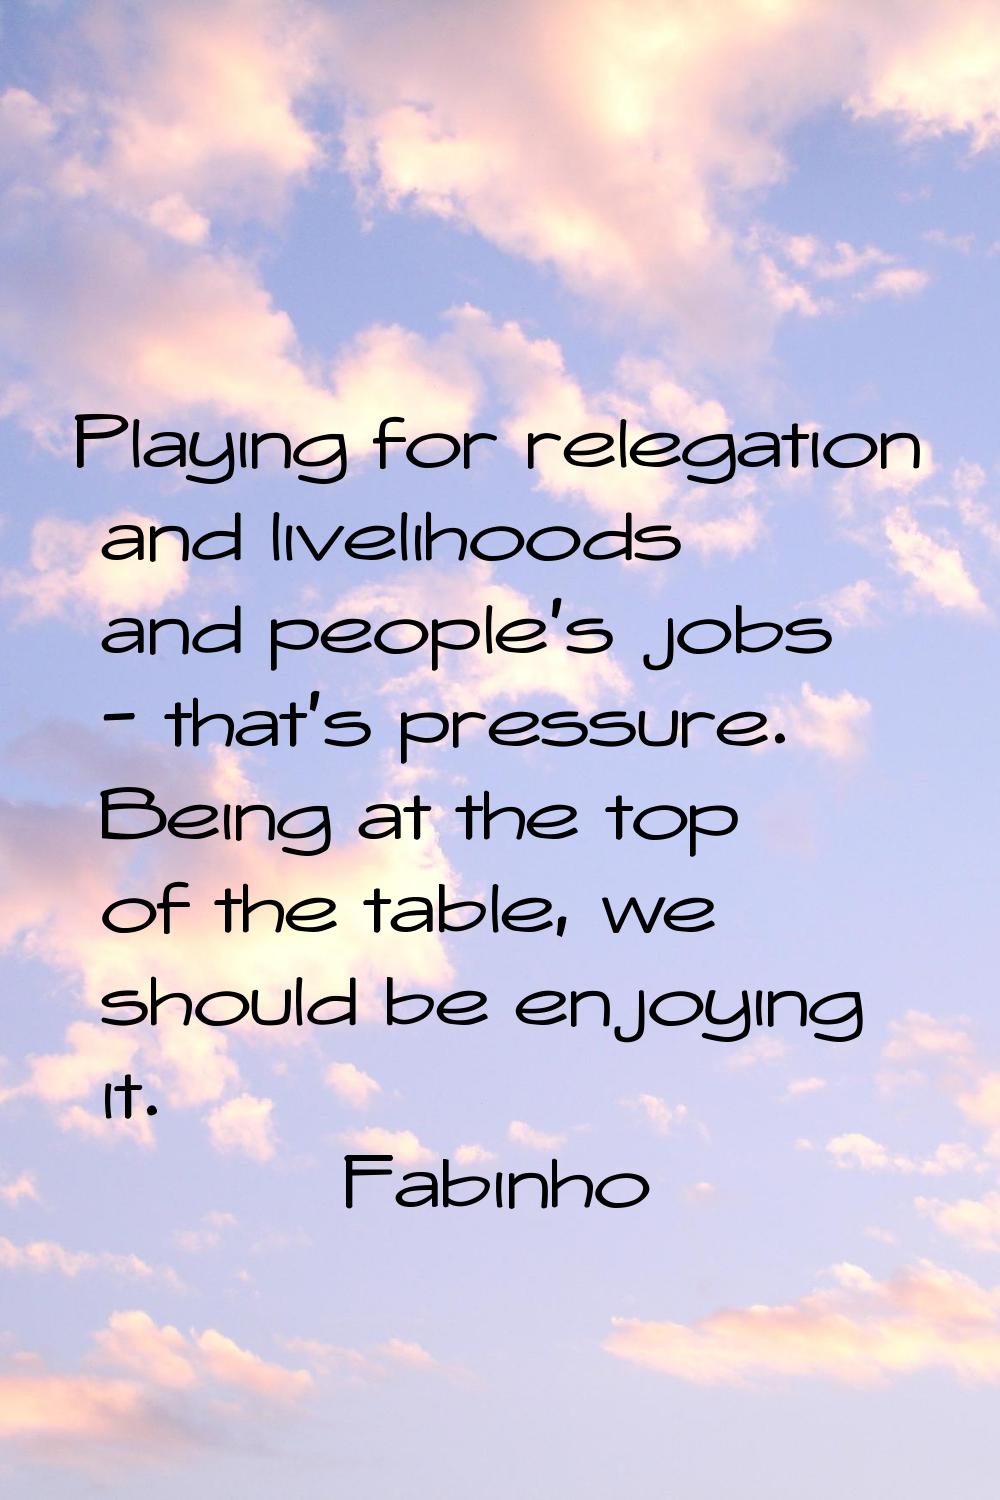 Playing for relegation and livelihoods and people's jobs - that's pressure. Being at the top of the